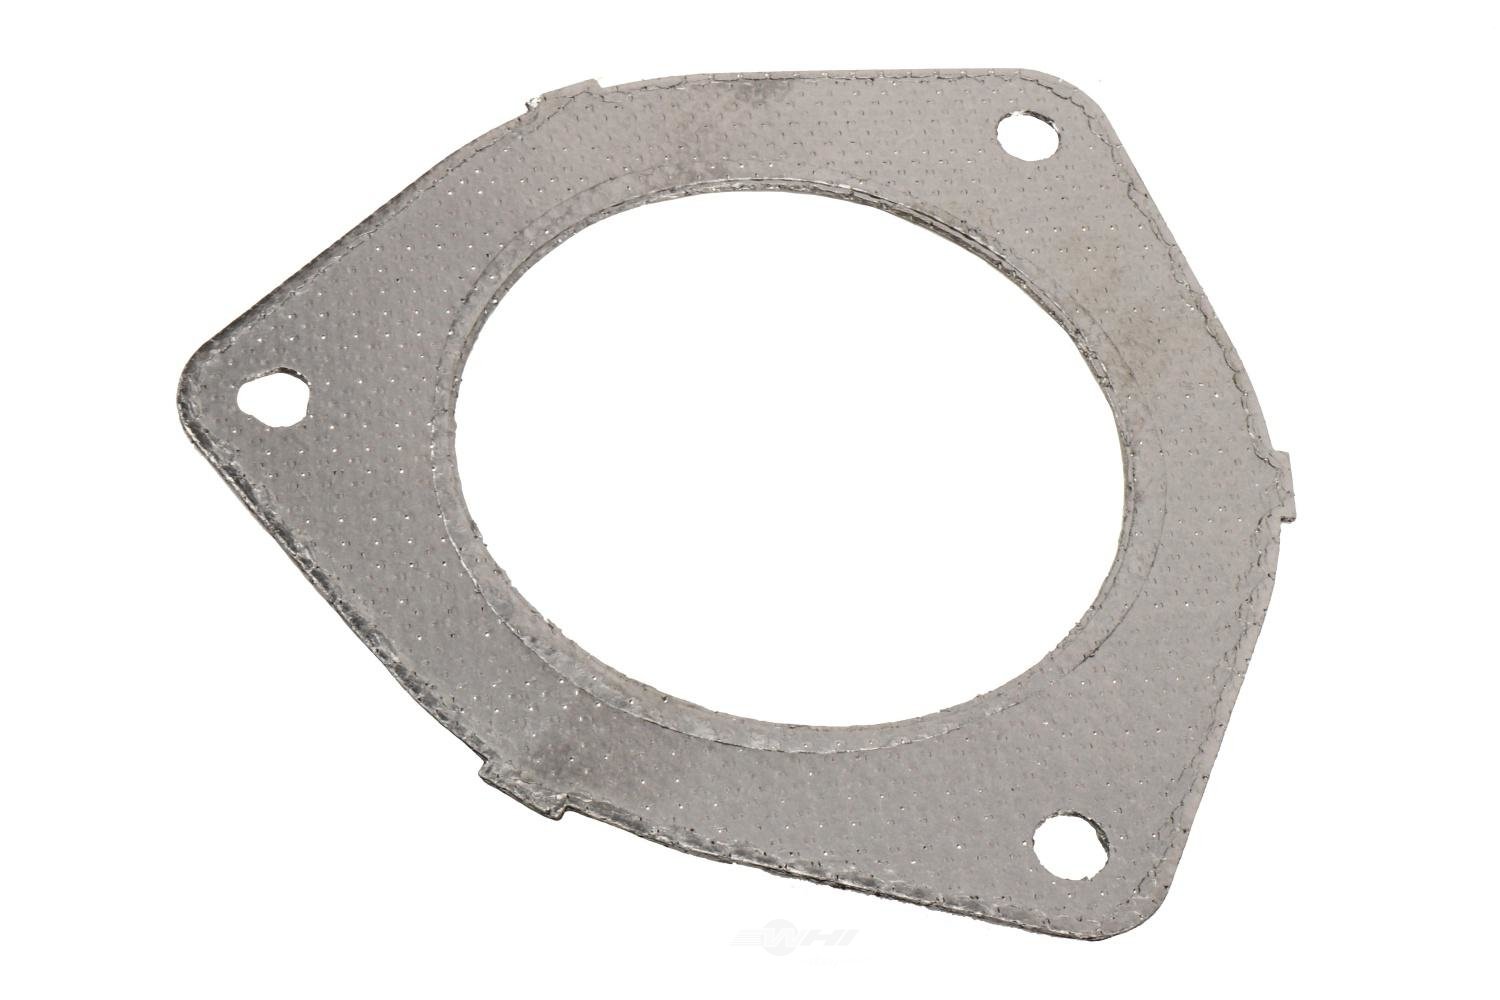 GM GENUINE PARTS - Exhaust Pipe to Manifold Gasket - GMP 15876234